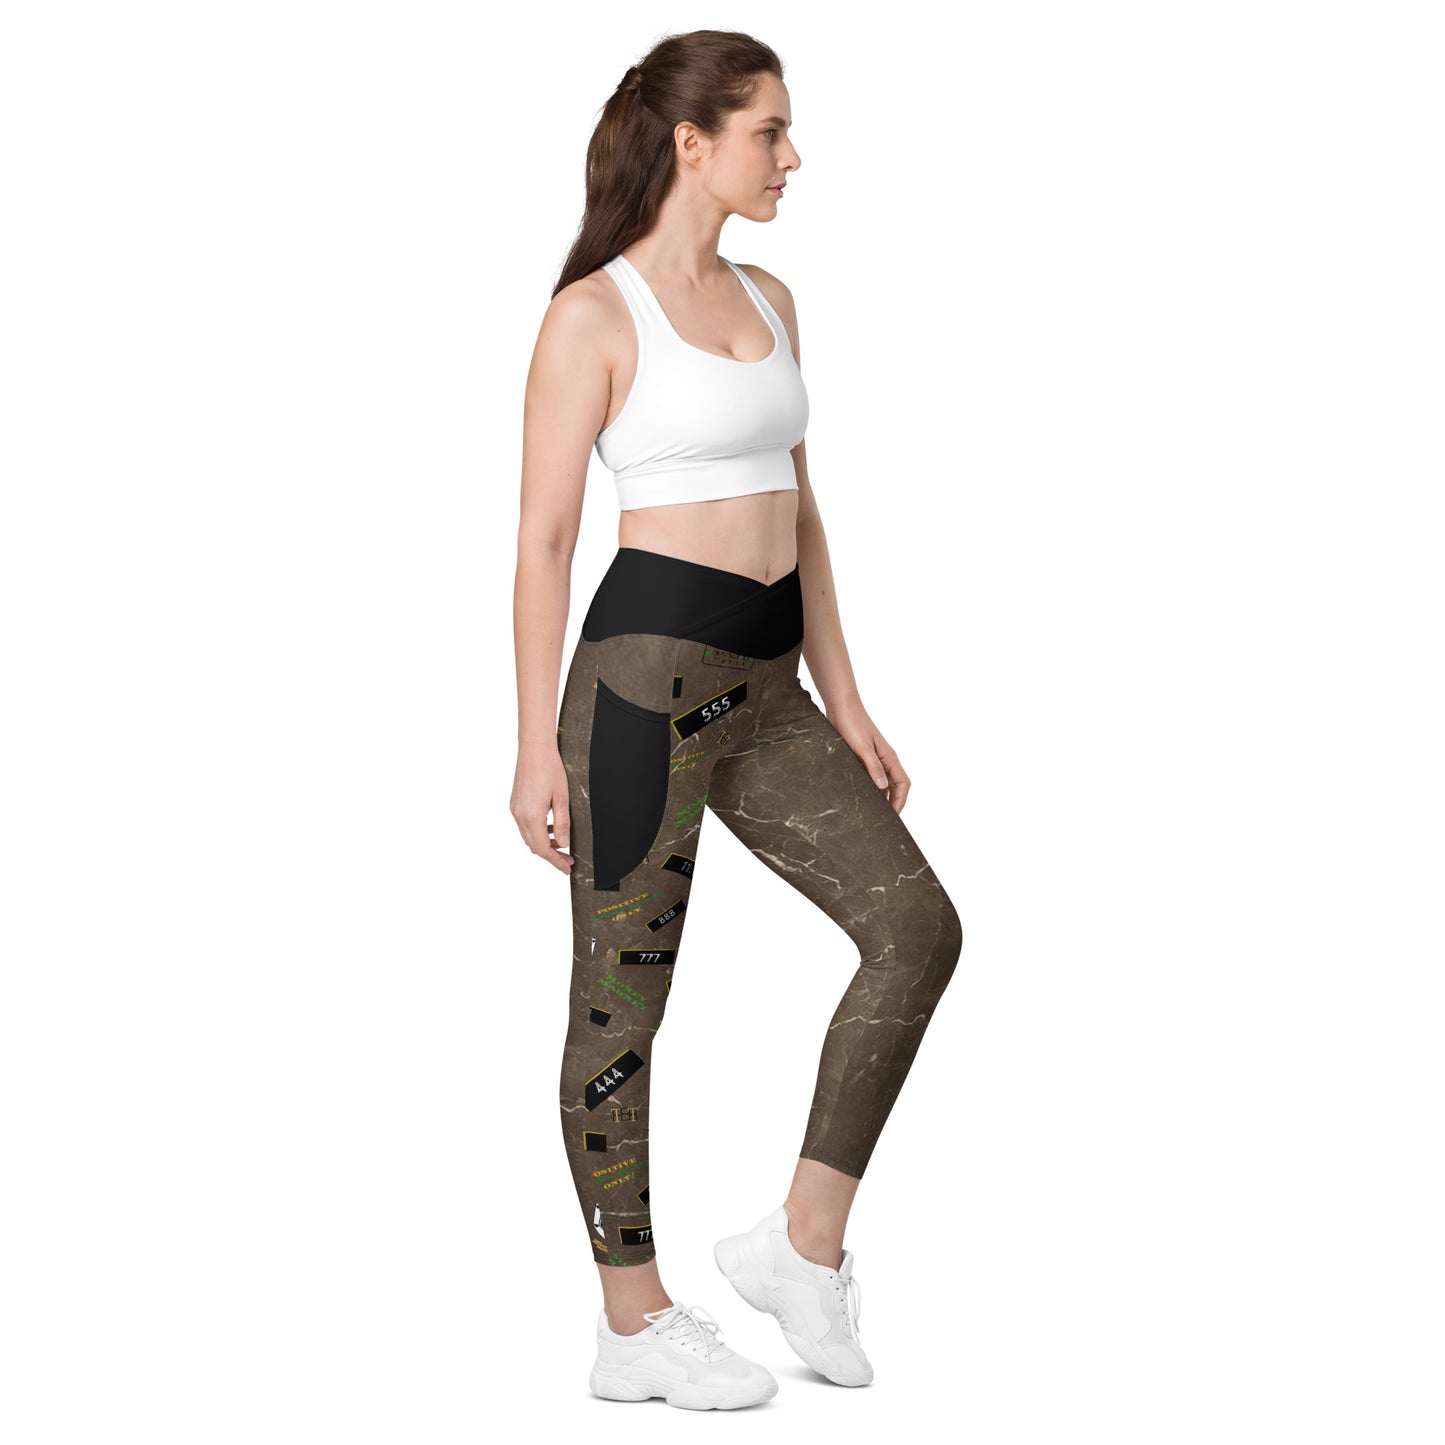 8xquiZit Collection - Women's Manifestation Coco-cured Marble Crossover Leggings with Pockets